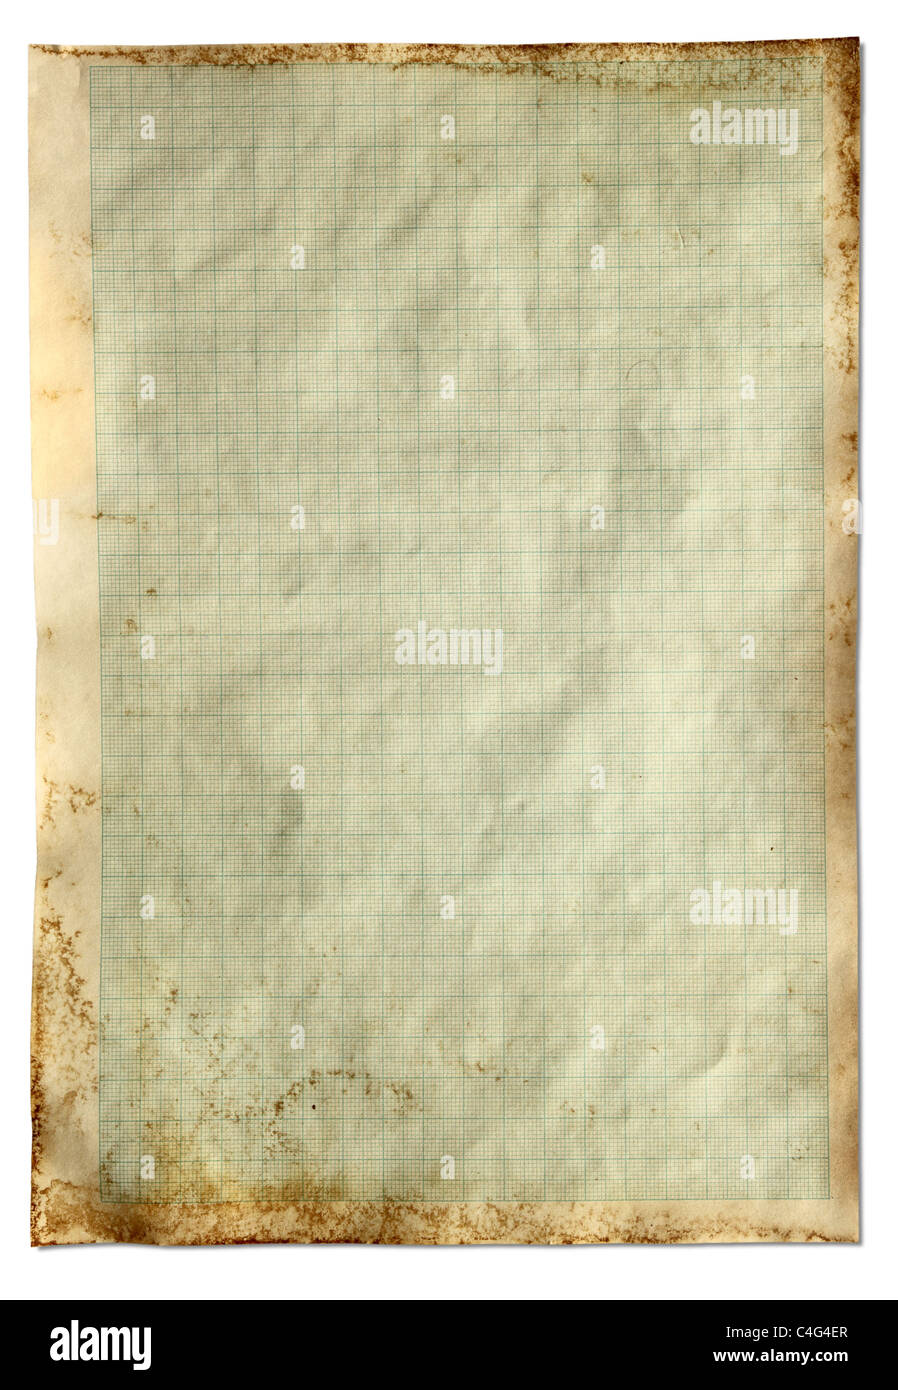 Old vintage stained graph paper, isolated on a white background. Stock Photo